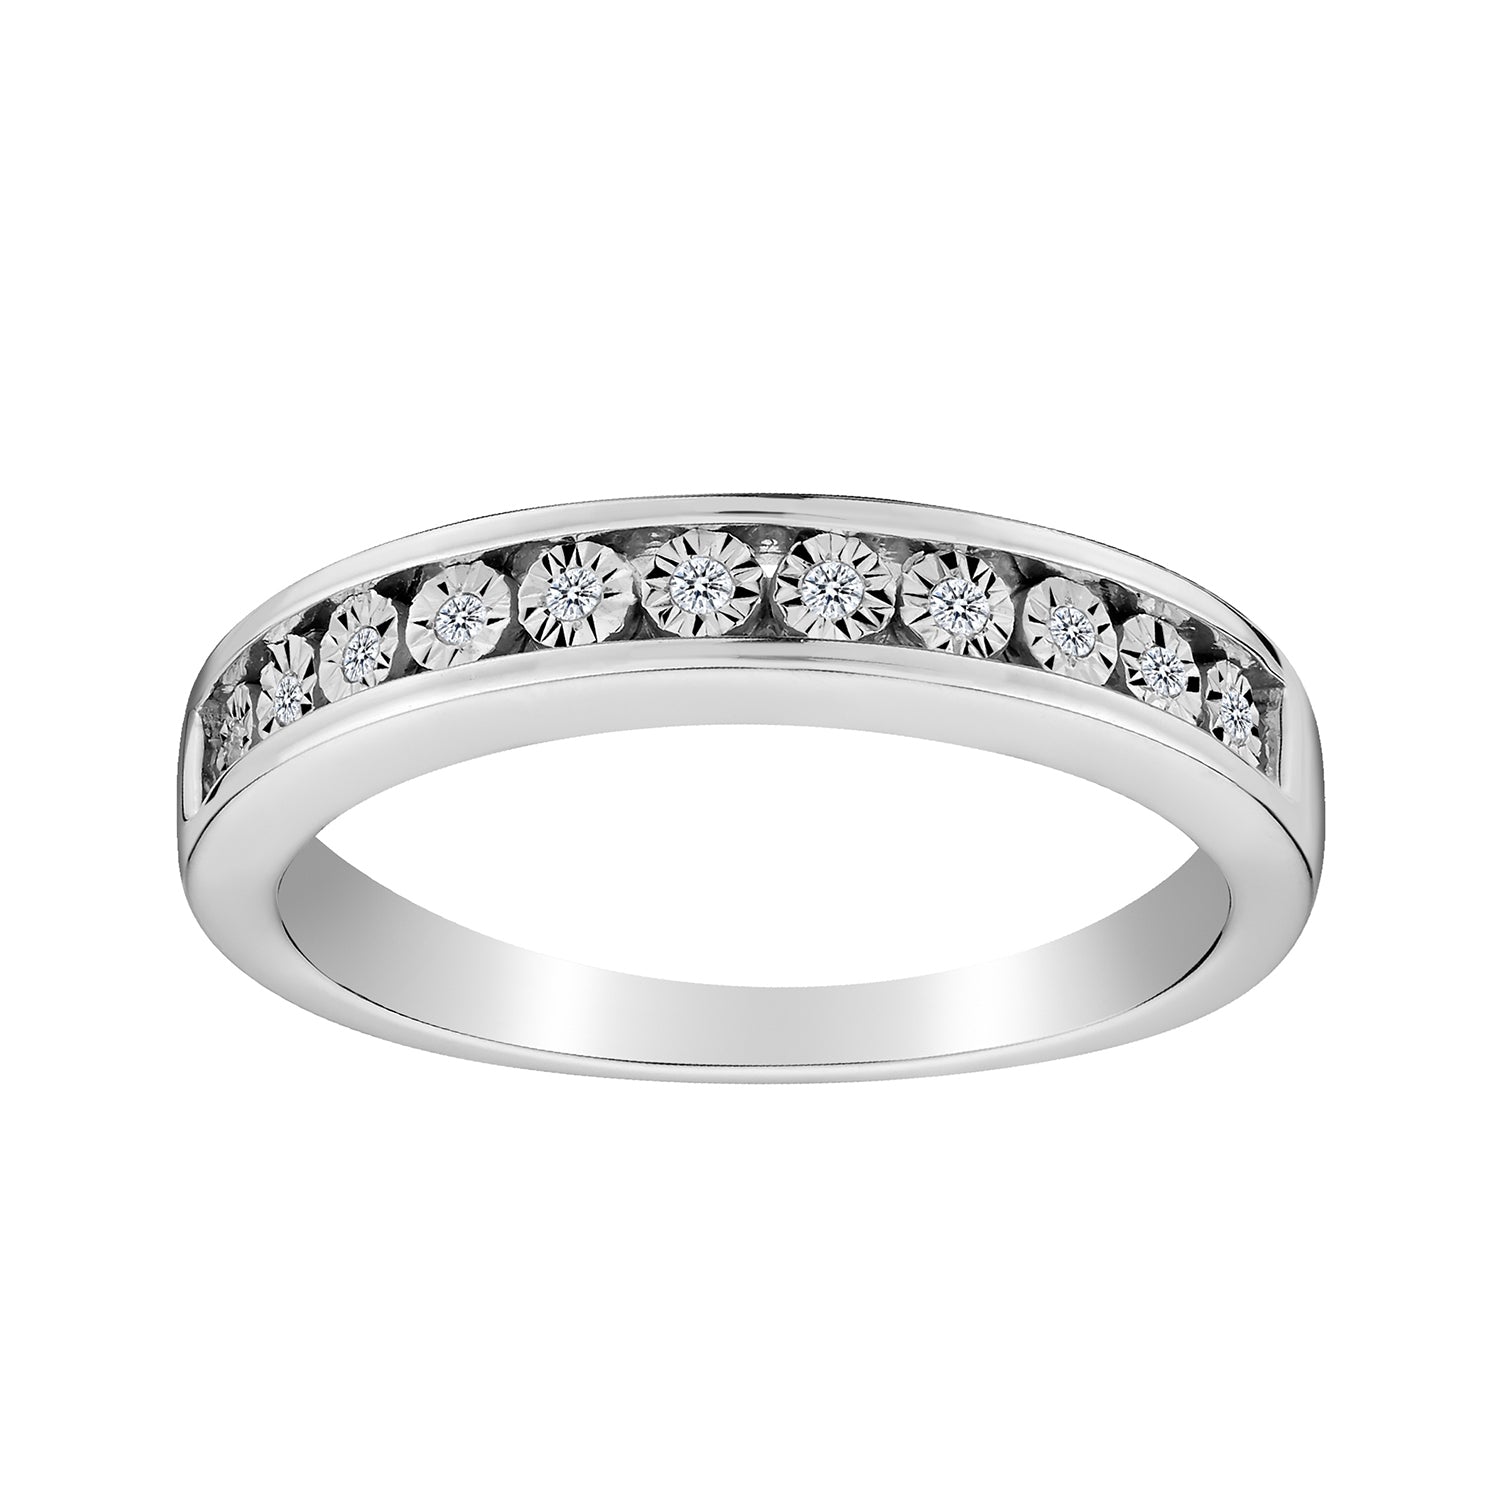 .06 Carat of Diamonds Ring Band, 10kt White Gold....................NOW